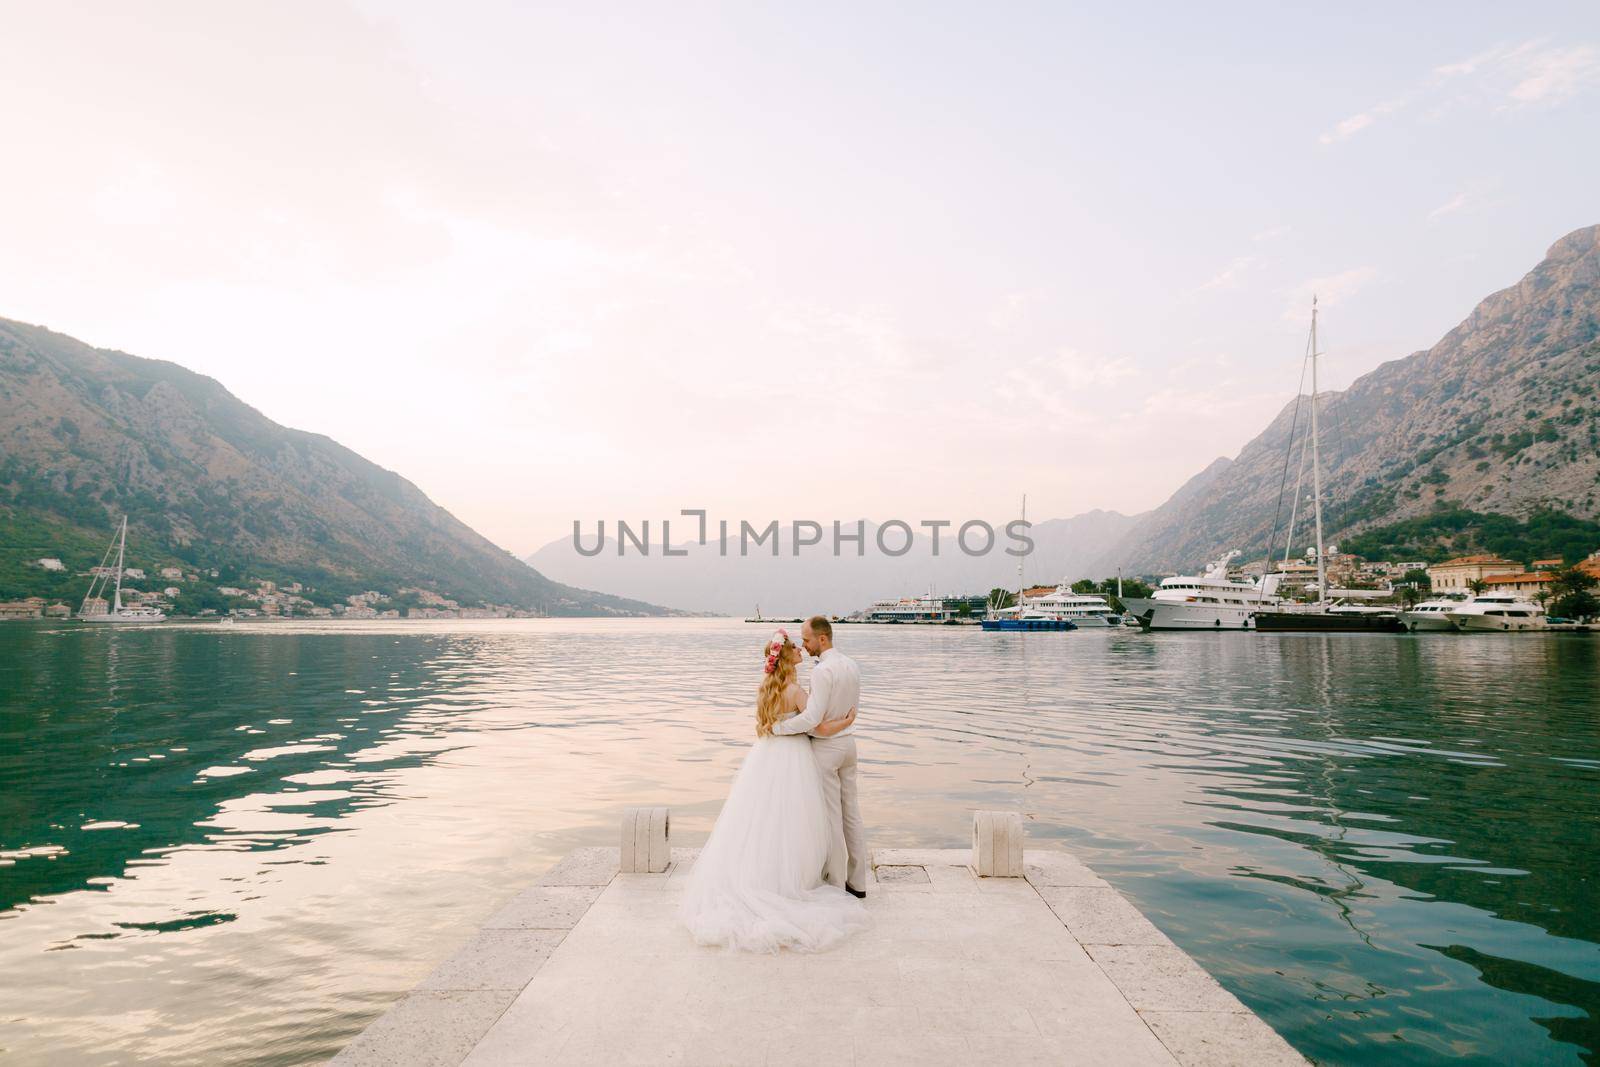 The bride in a wreath and groom hug on the pier near the old town of Kotor in the Bay of Kotor by Nadtochiy